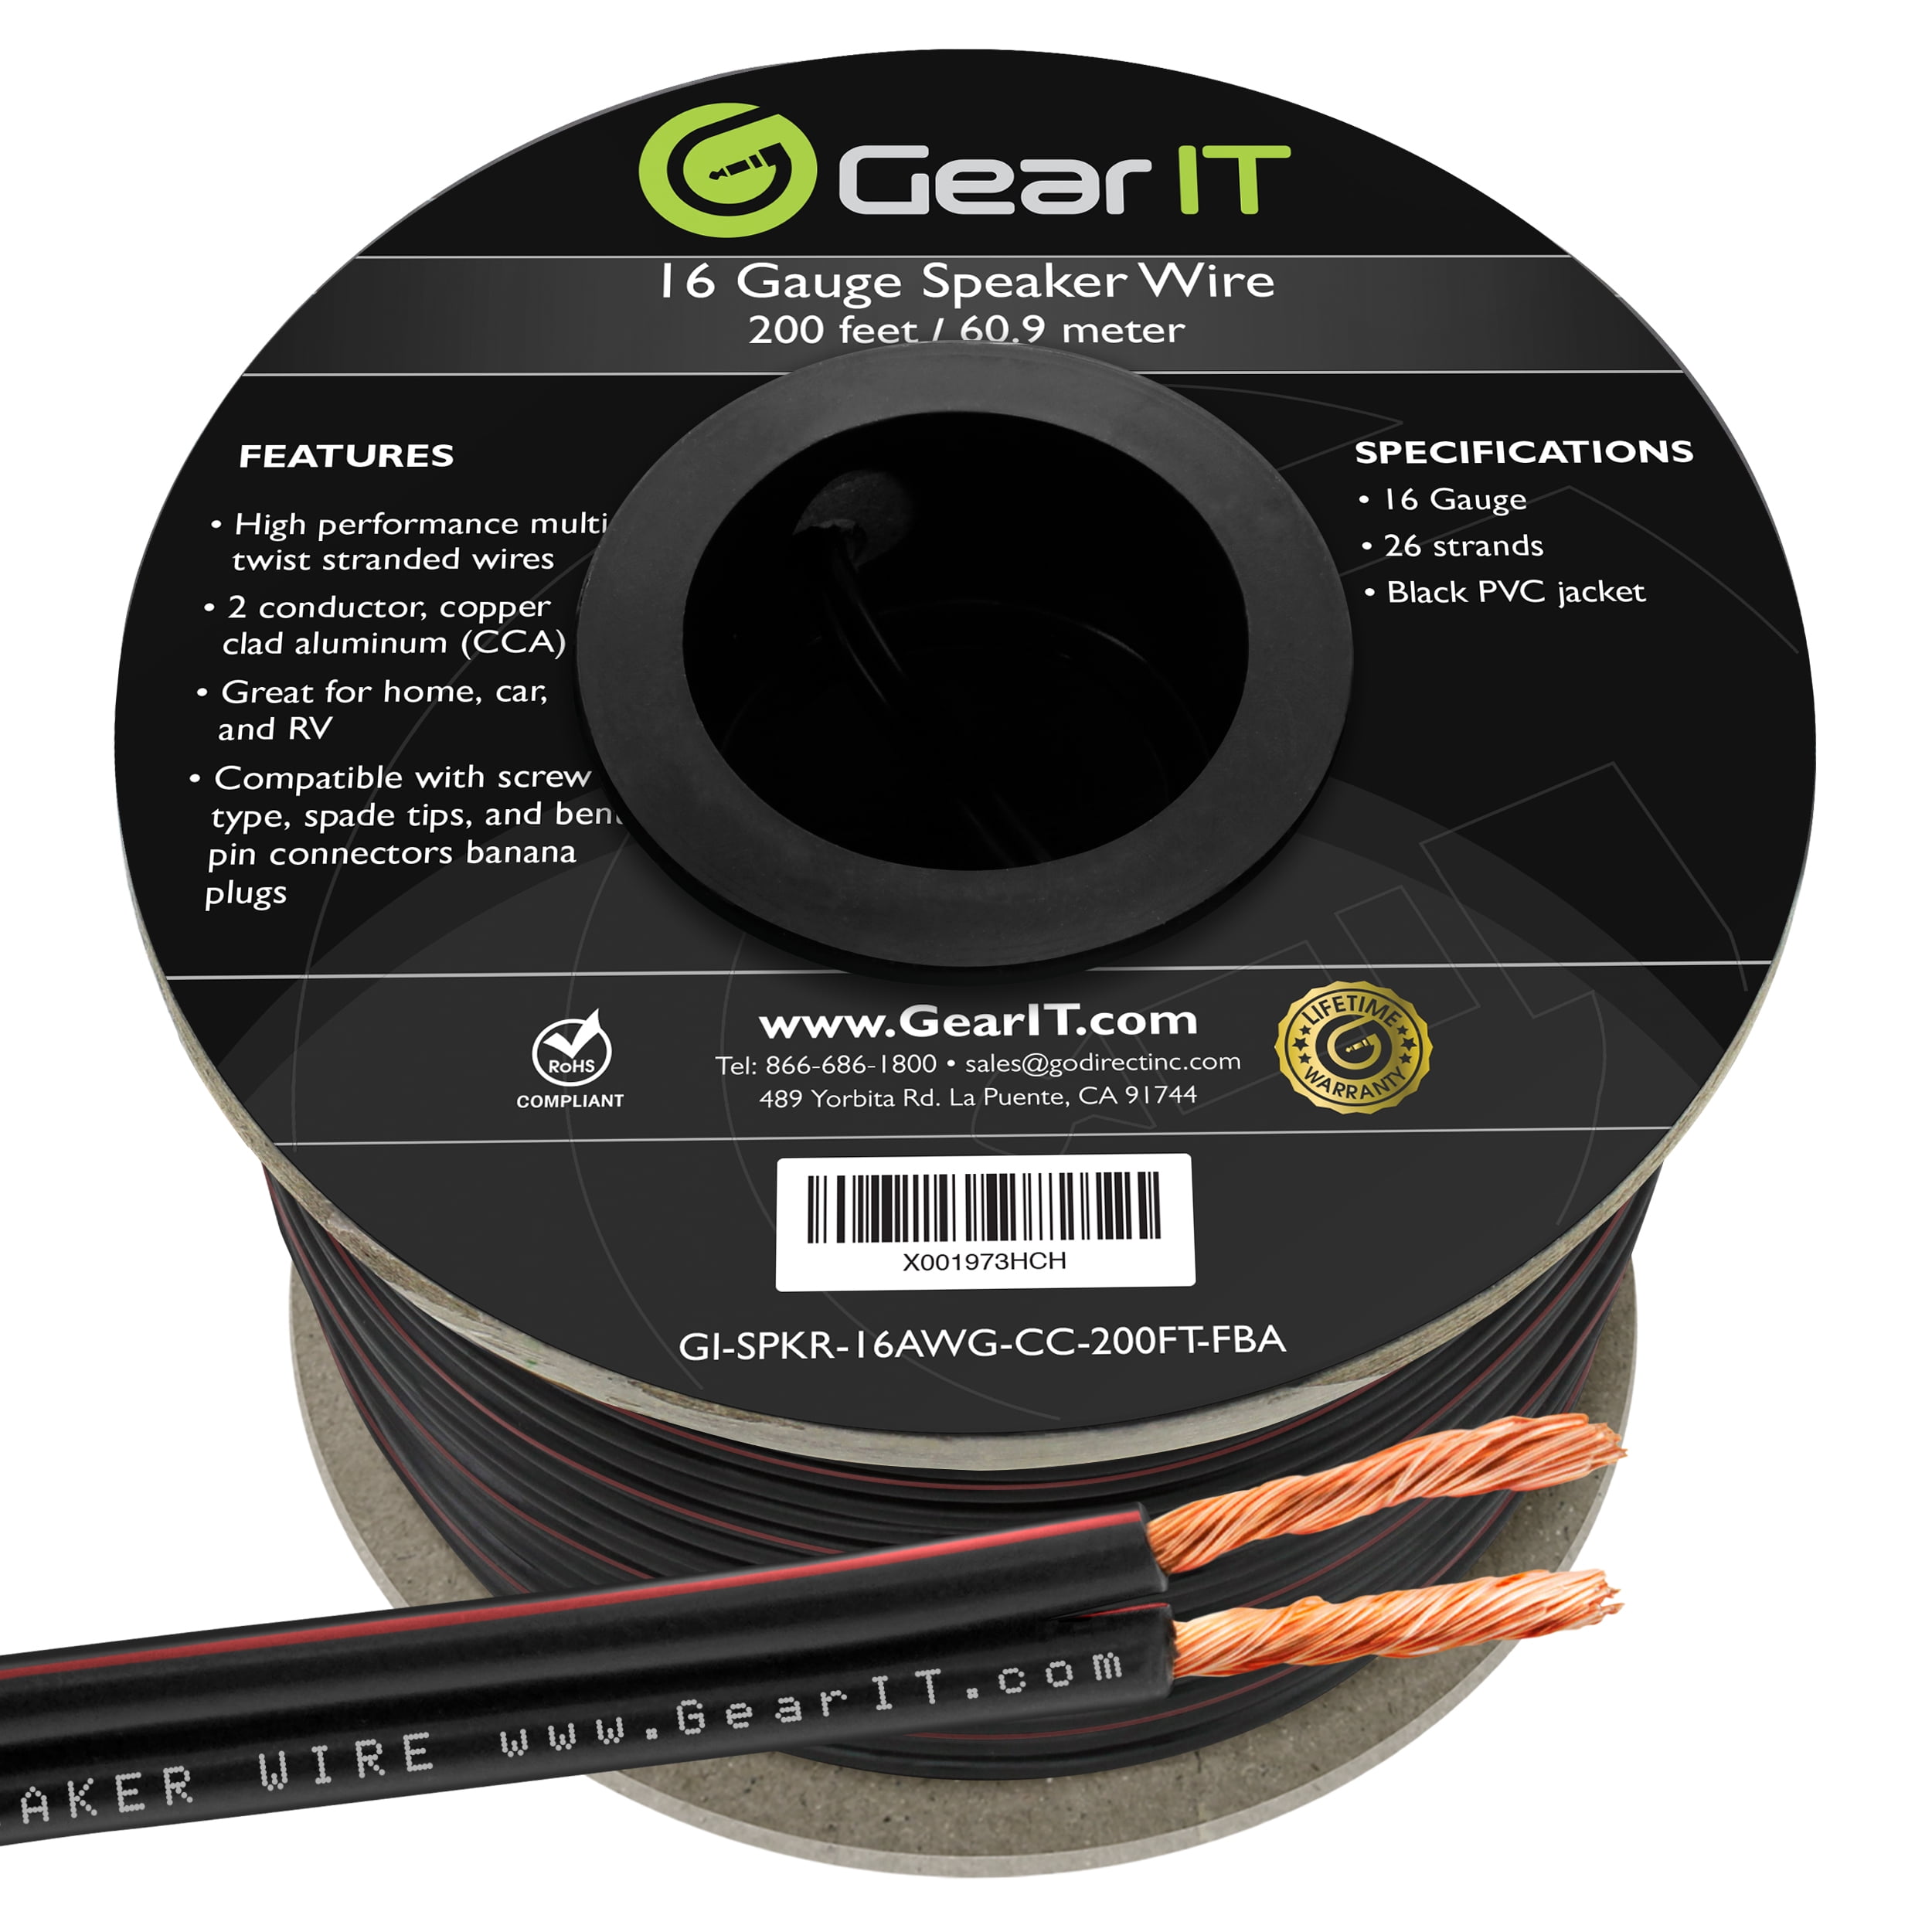 16AWG Speaker Wire, GearIT Pro Series 16 Gauge Speaker Wire Cable (200 Feet  / 60 Meters) Great Use for Home Theater Speakers and Car Speakers, Black